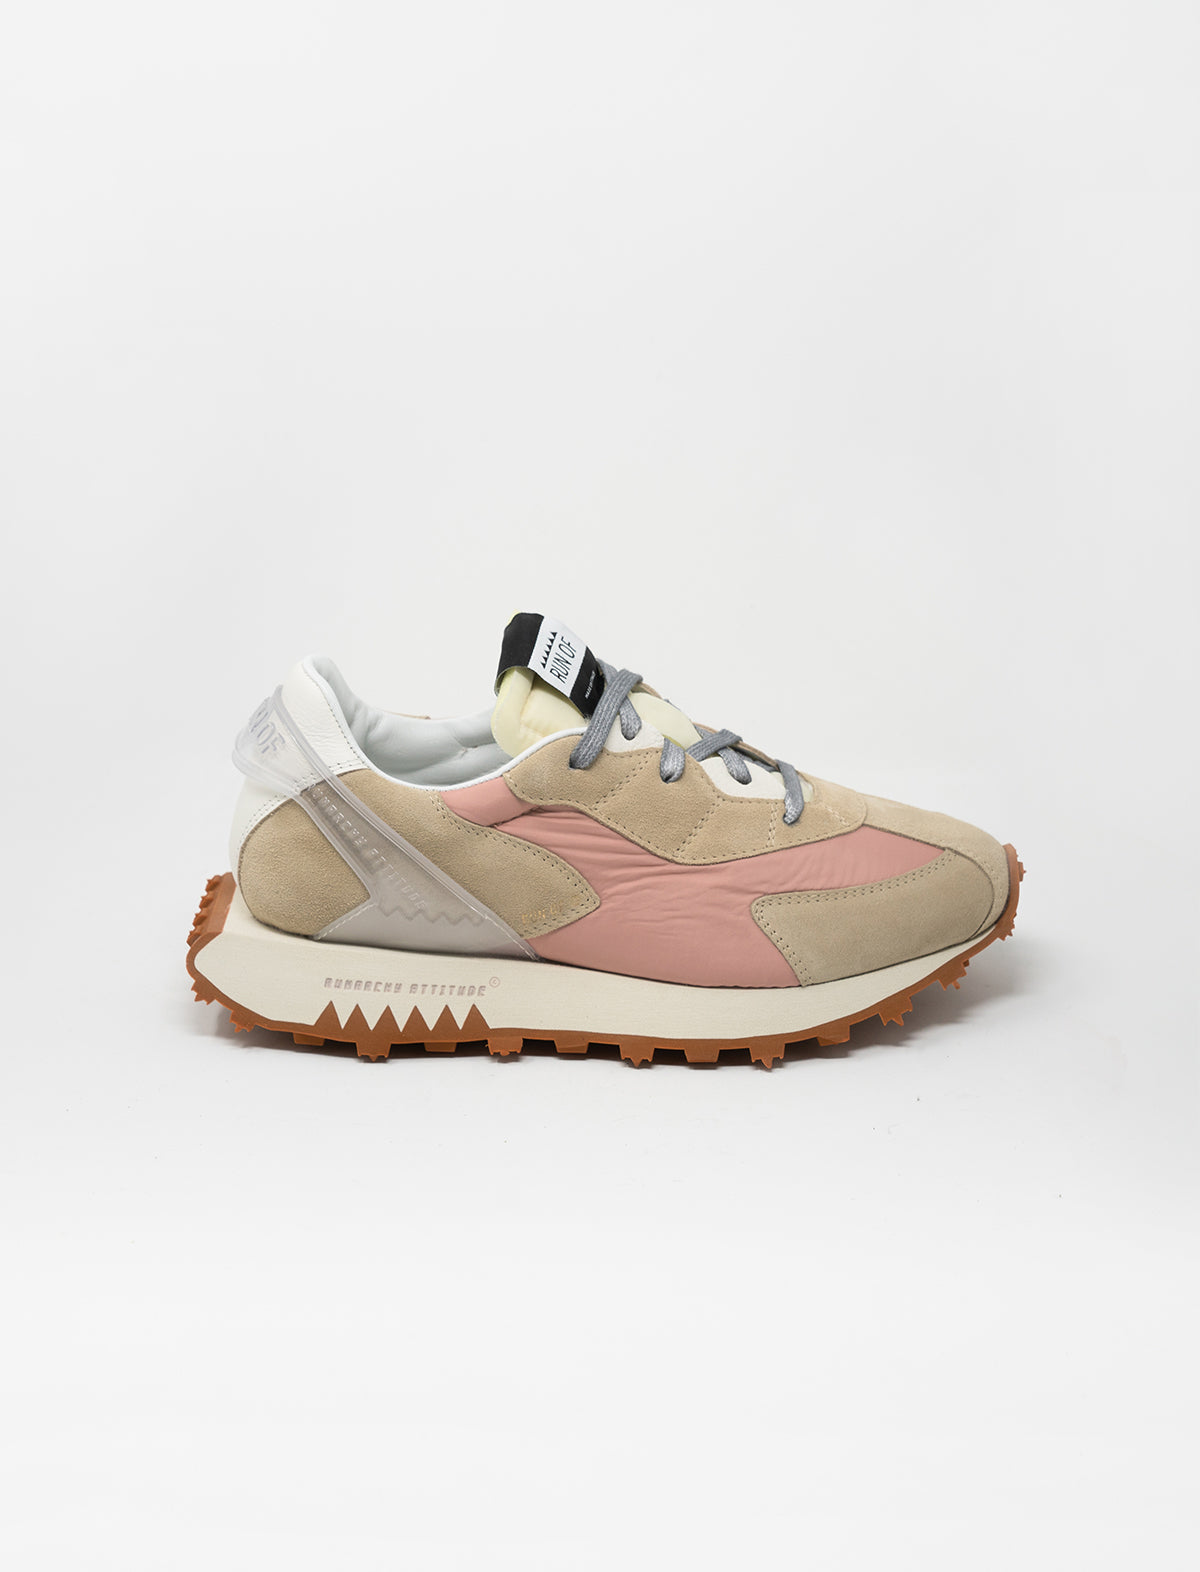 RUN OF Piggy Sneakers in Pink and Beige Multi